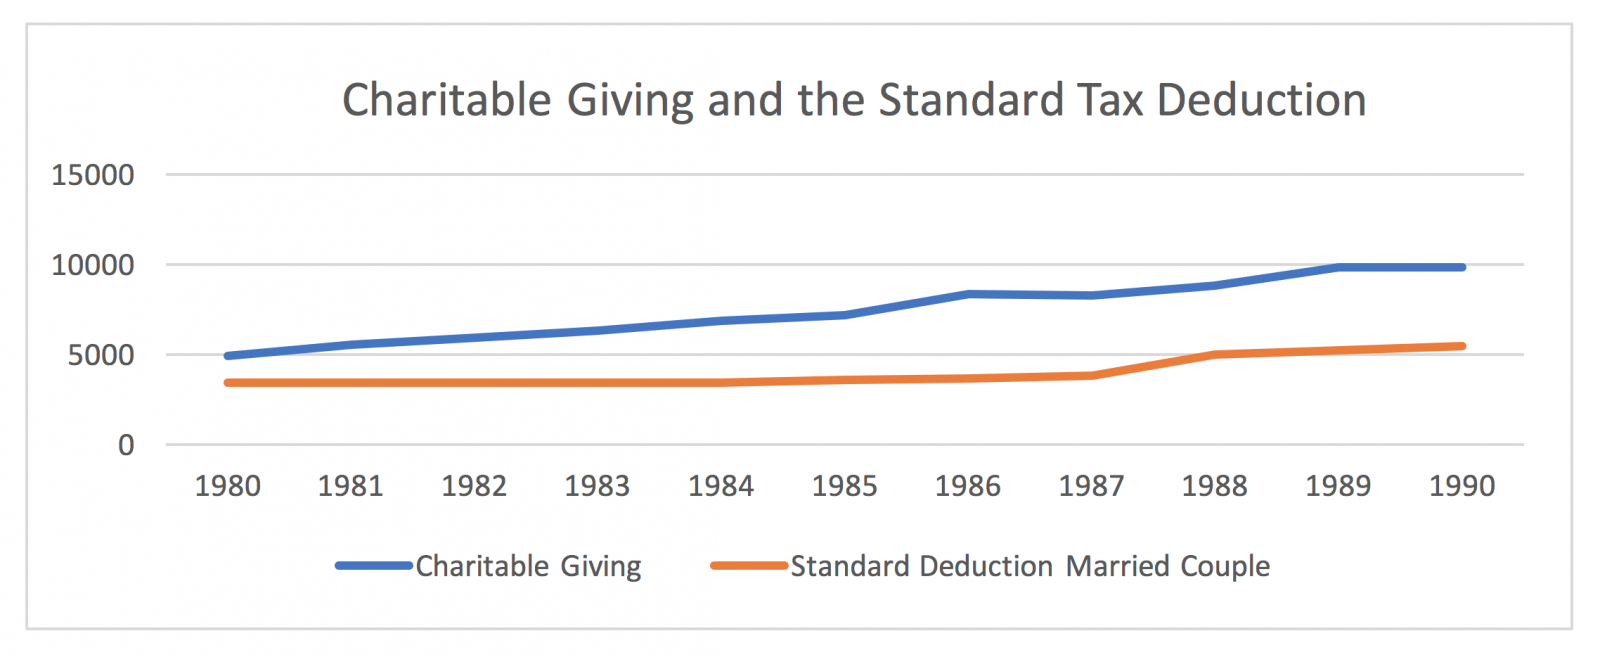 Charitable Giving and the Standard Tax Deduction